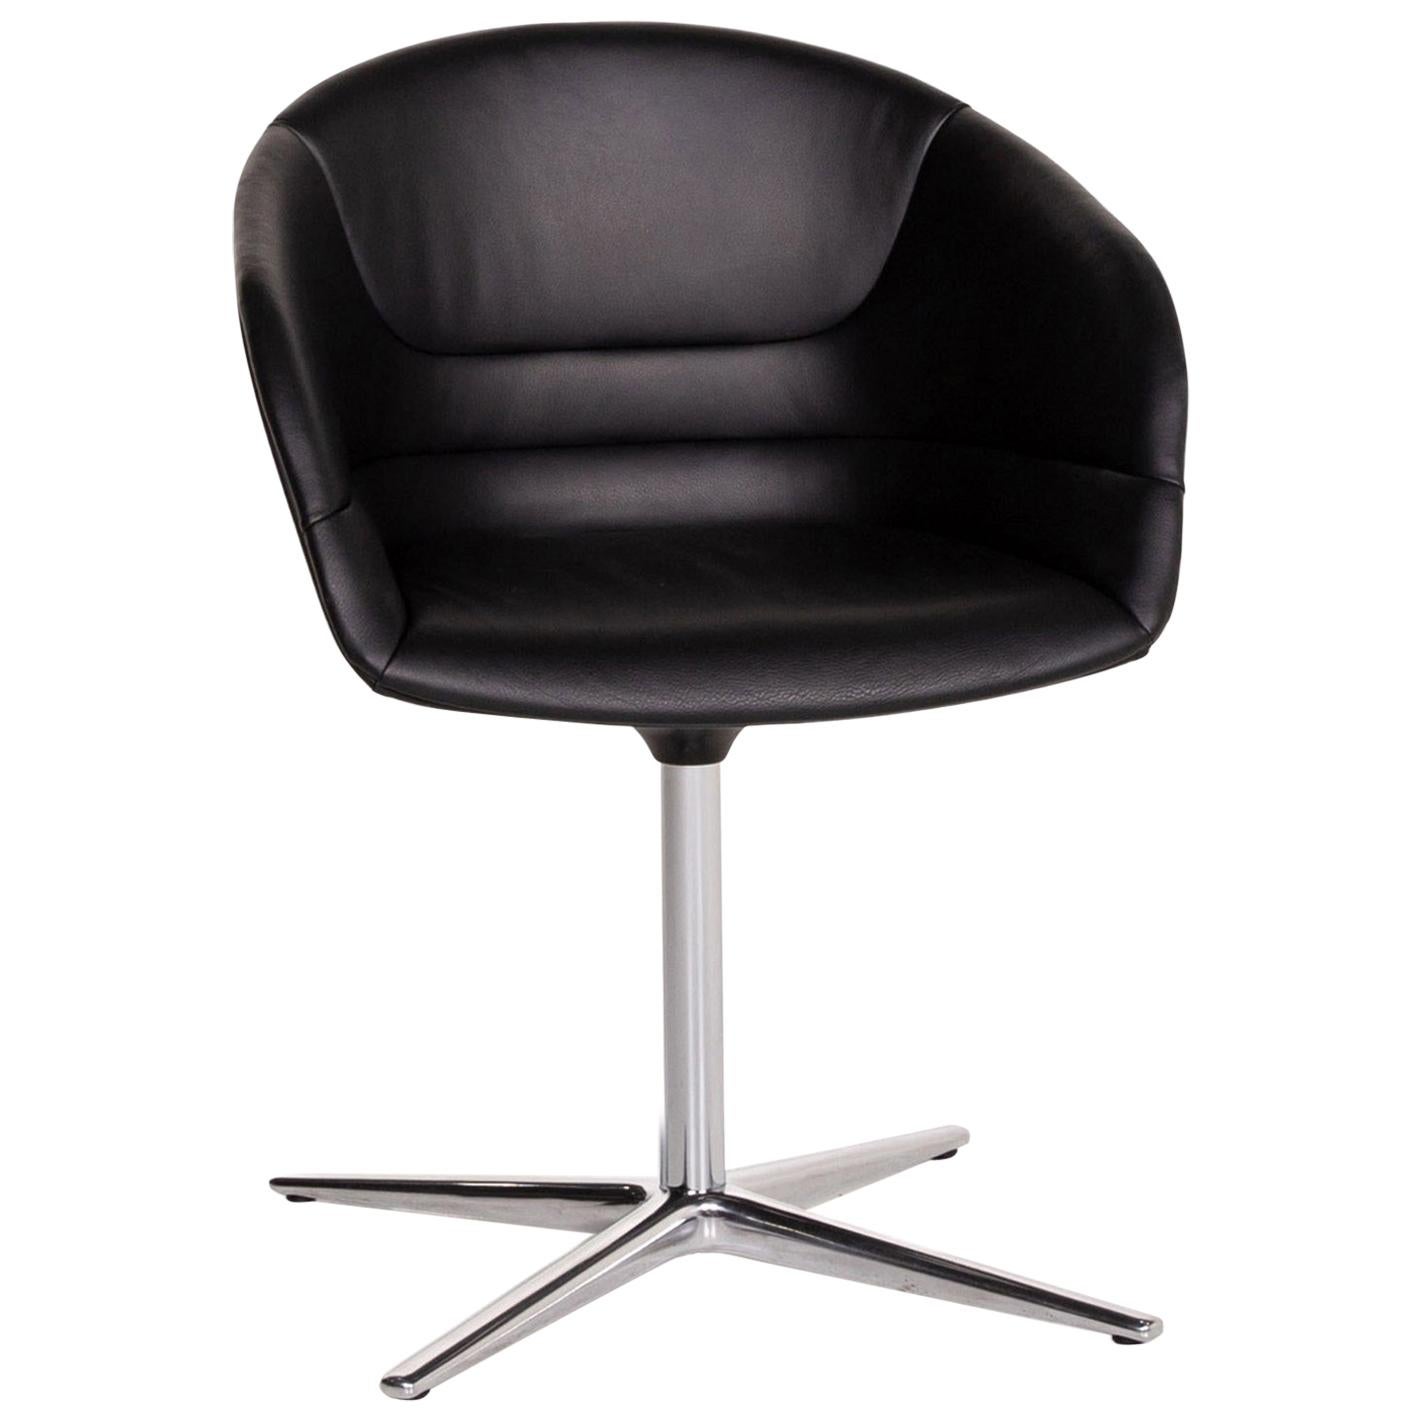 Walter Knoll Kyo Leather Armchair Black Chair Swivel For Sale